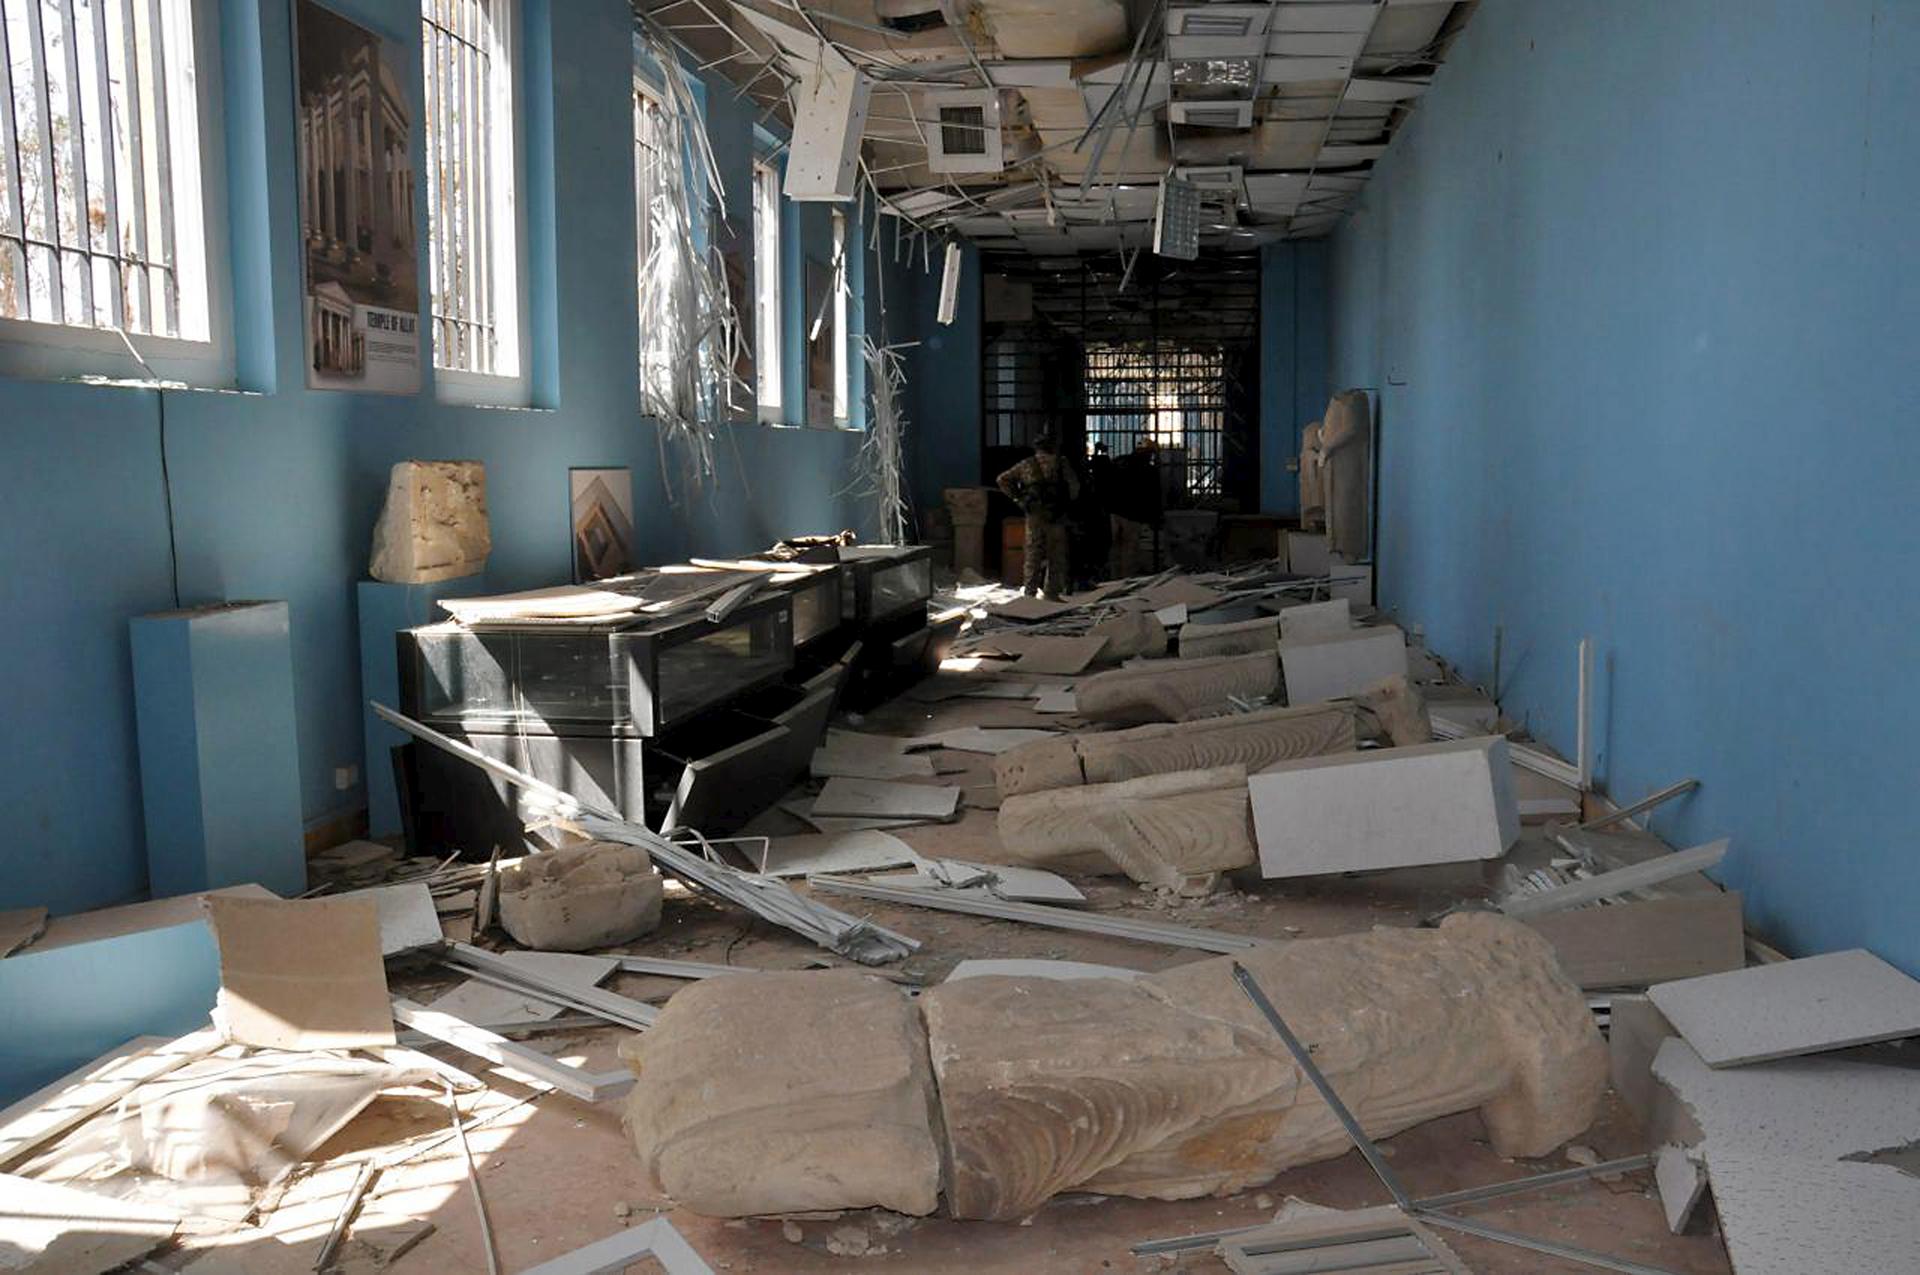 Damaged artifacts inside the museum of the historic city of Palmyra, after forces loyal to Syria's President Bashar al-Assad recaptured the city, in Homs Governorate.